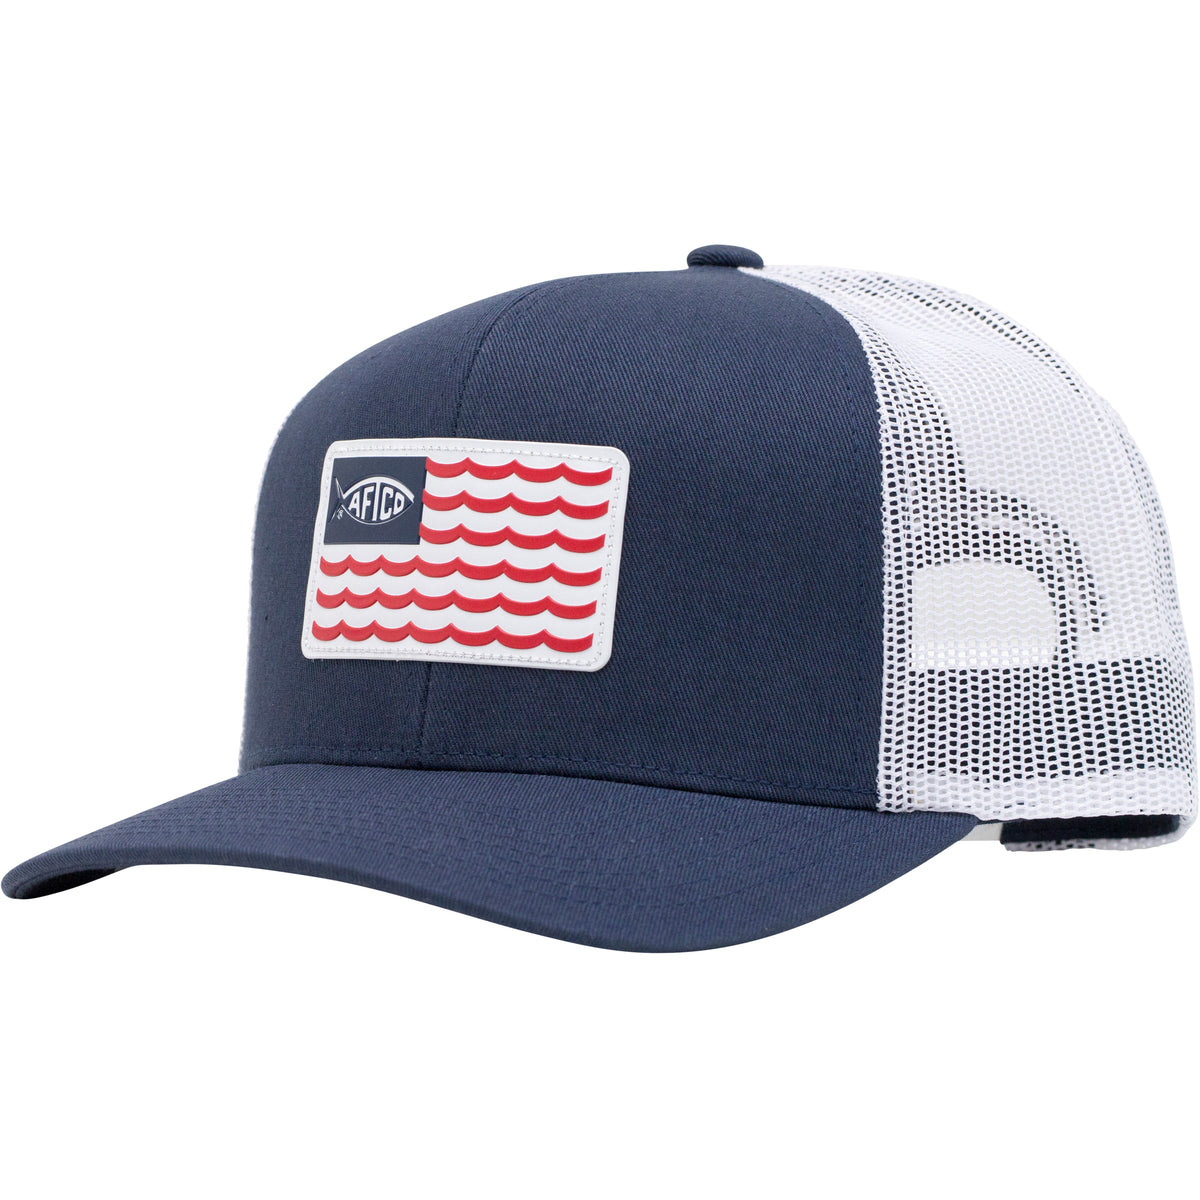 Aftco Canton Trucker Youth Hat